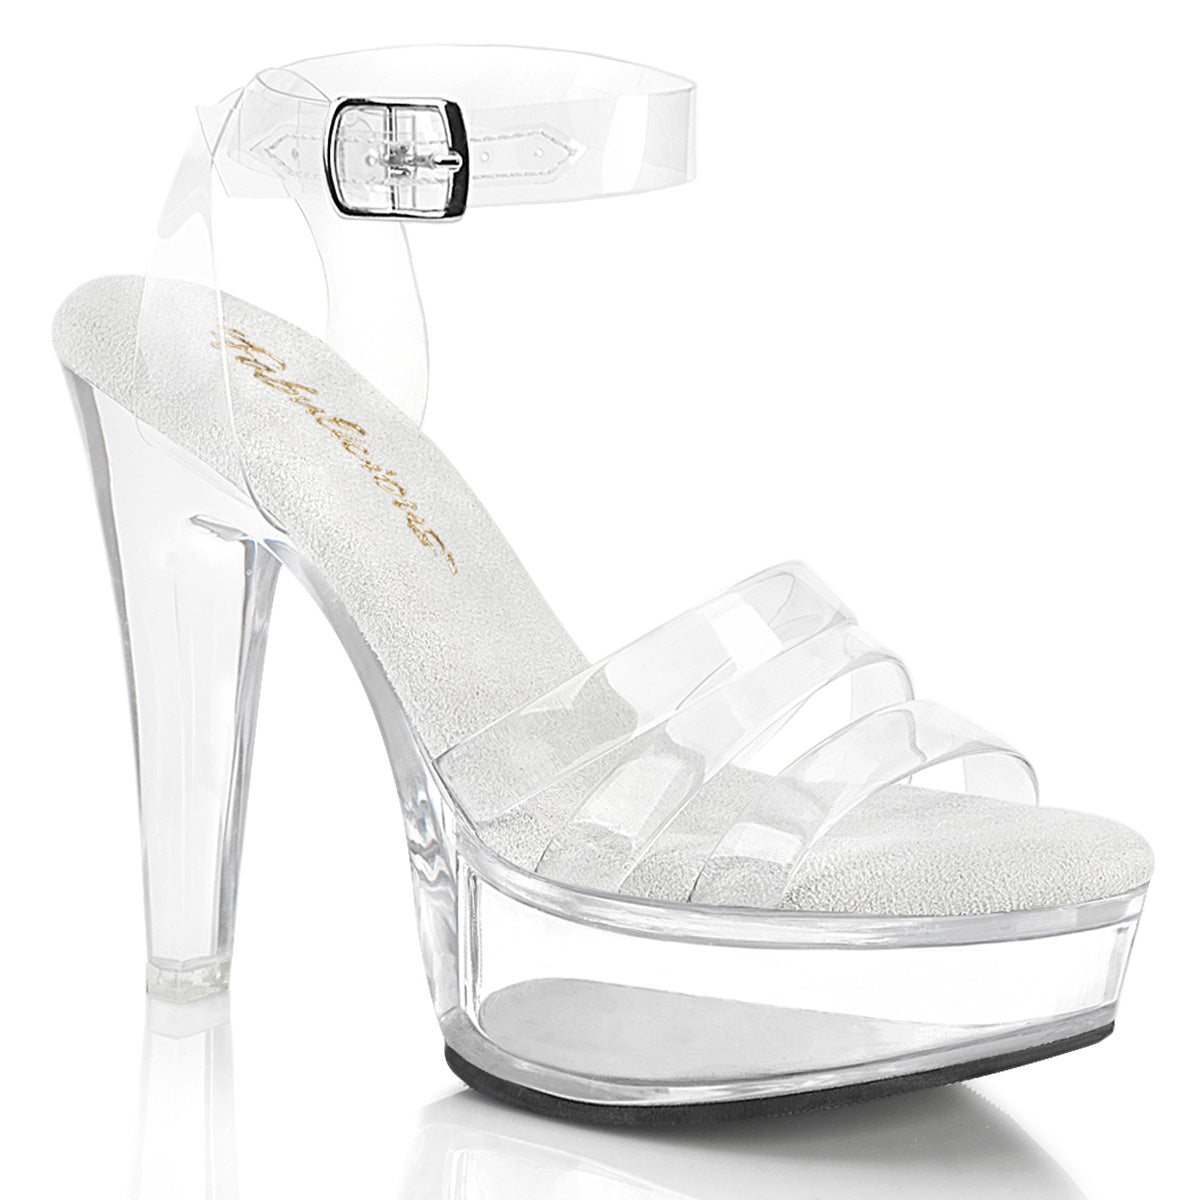 MARTINI-505 Wrap Around Ankle Strap Sandal Clear Multi view 1